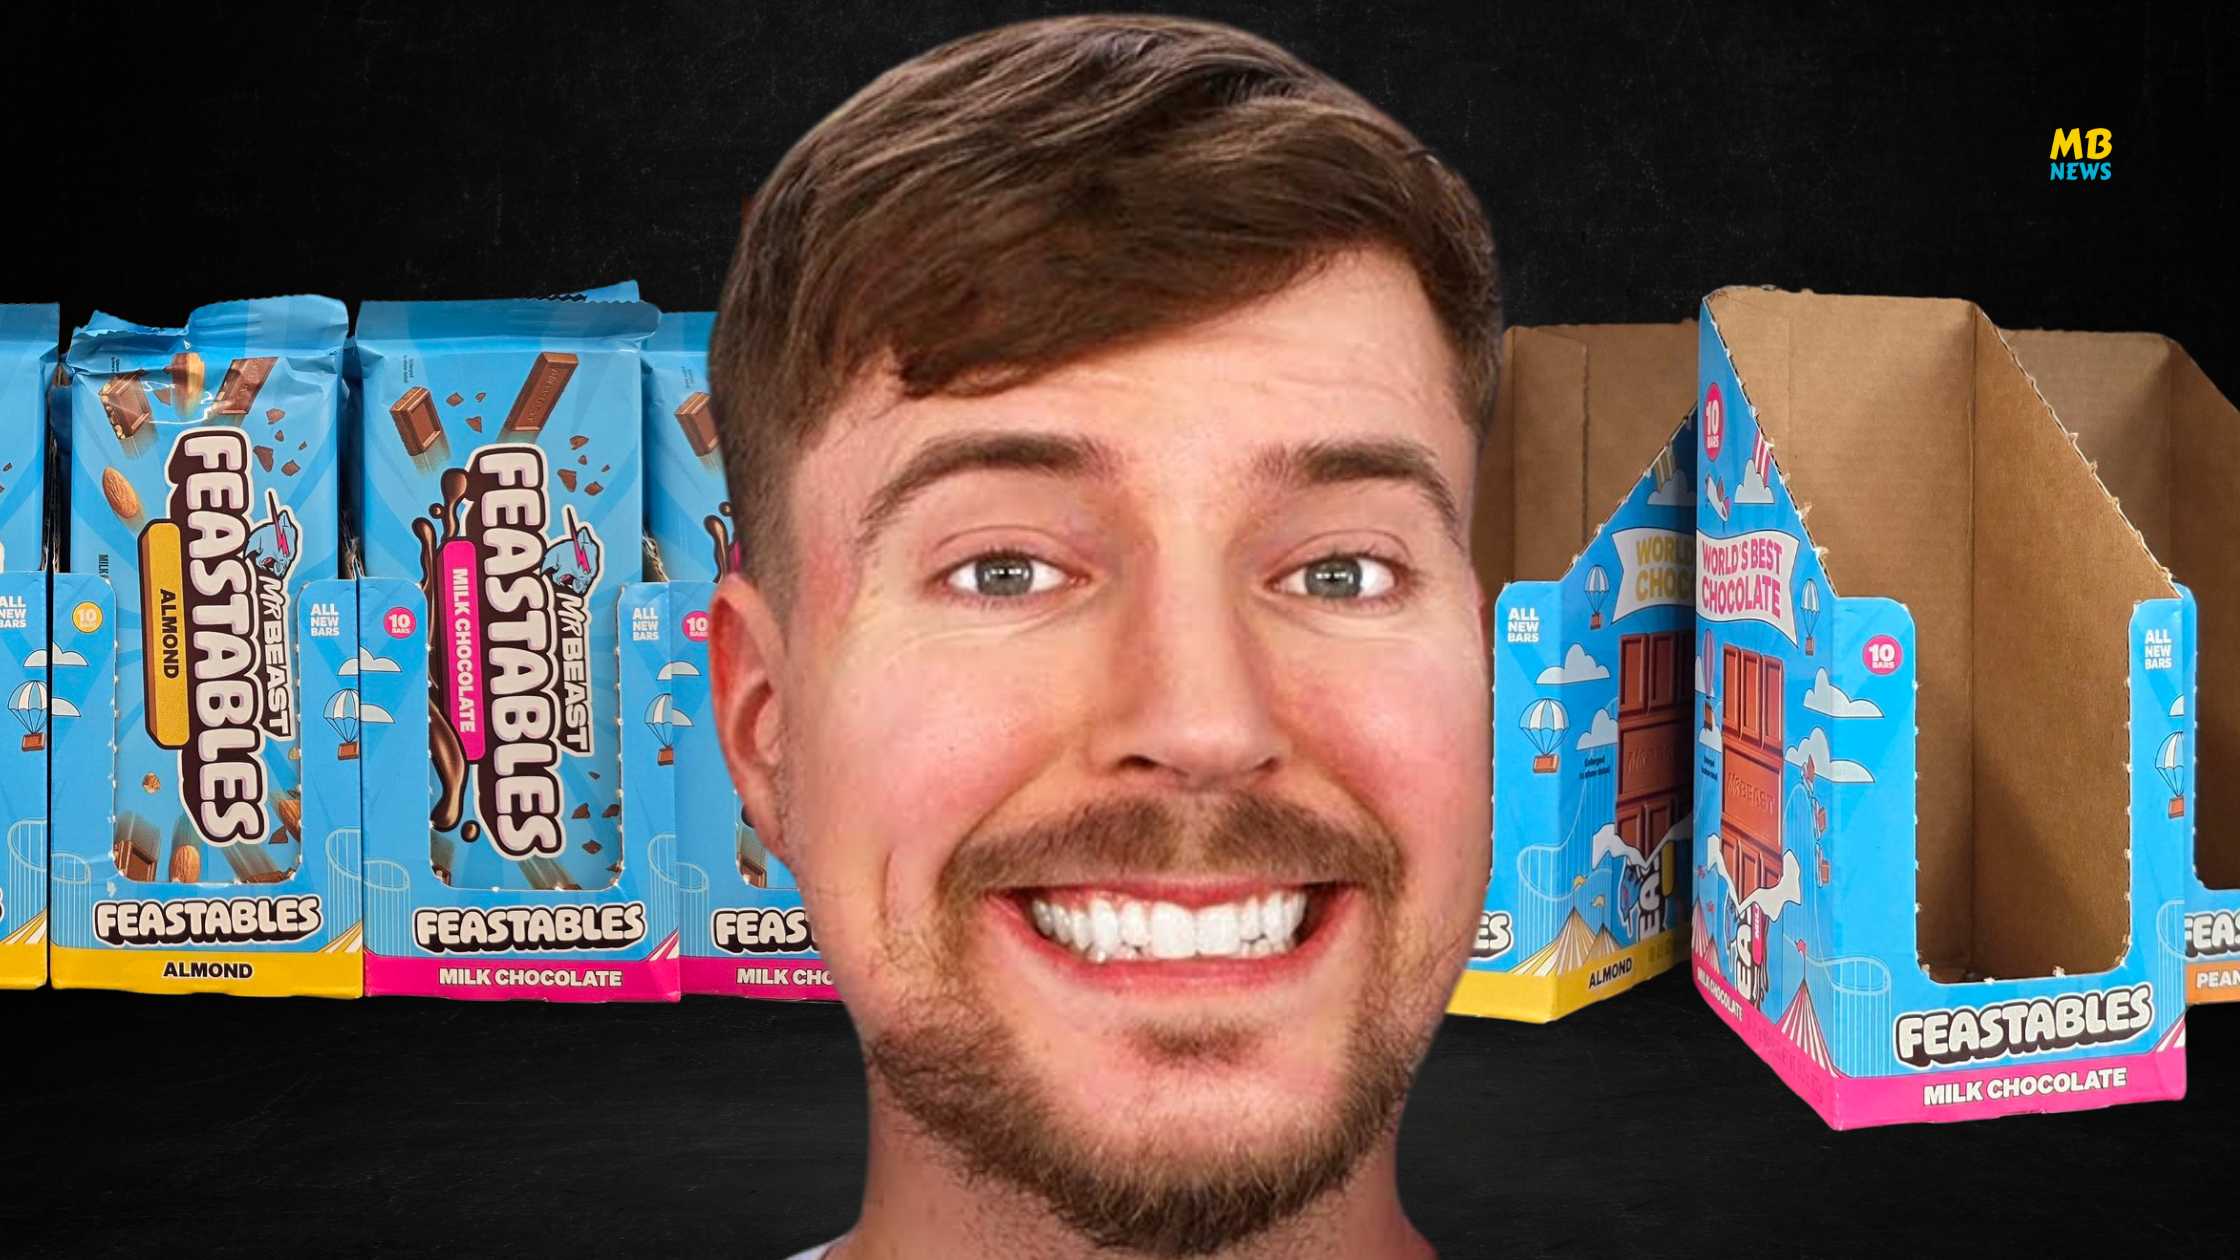 The Buzz Behind Feastables How MrBeast is Revolutionizing the Snack Industry